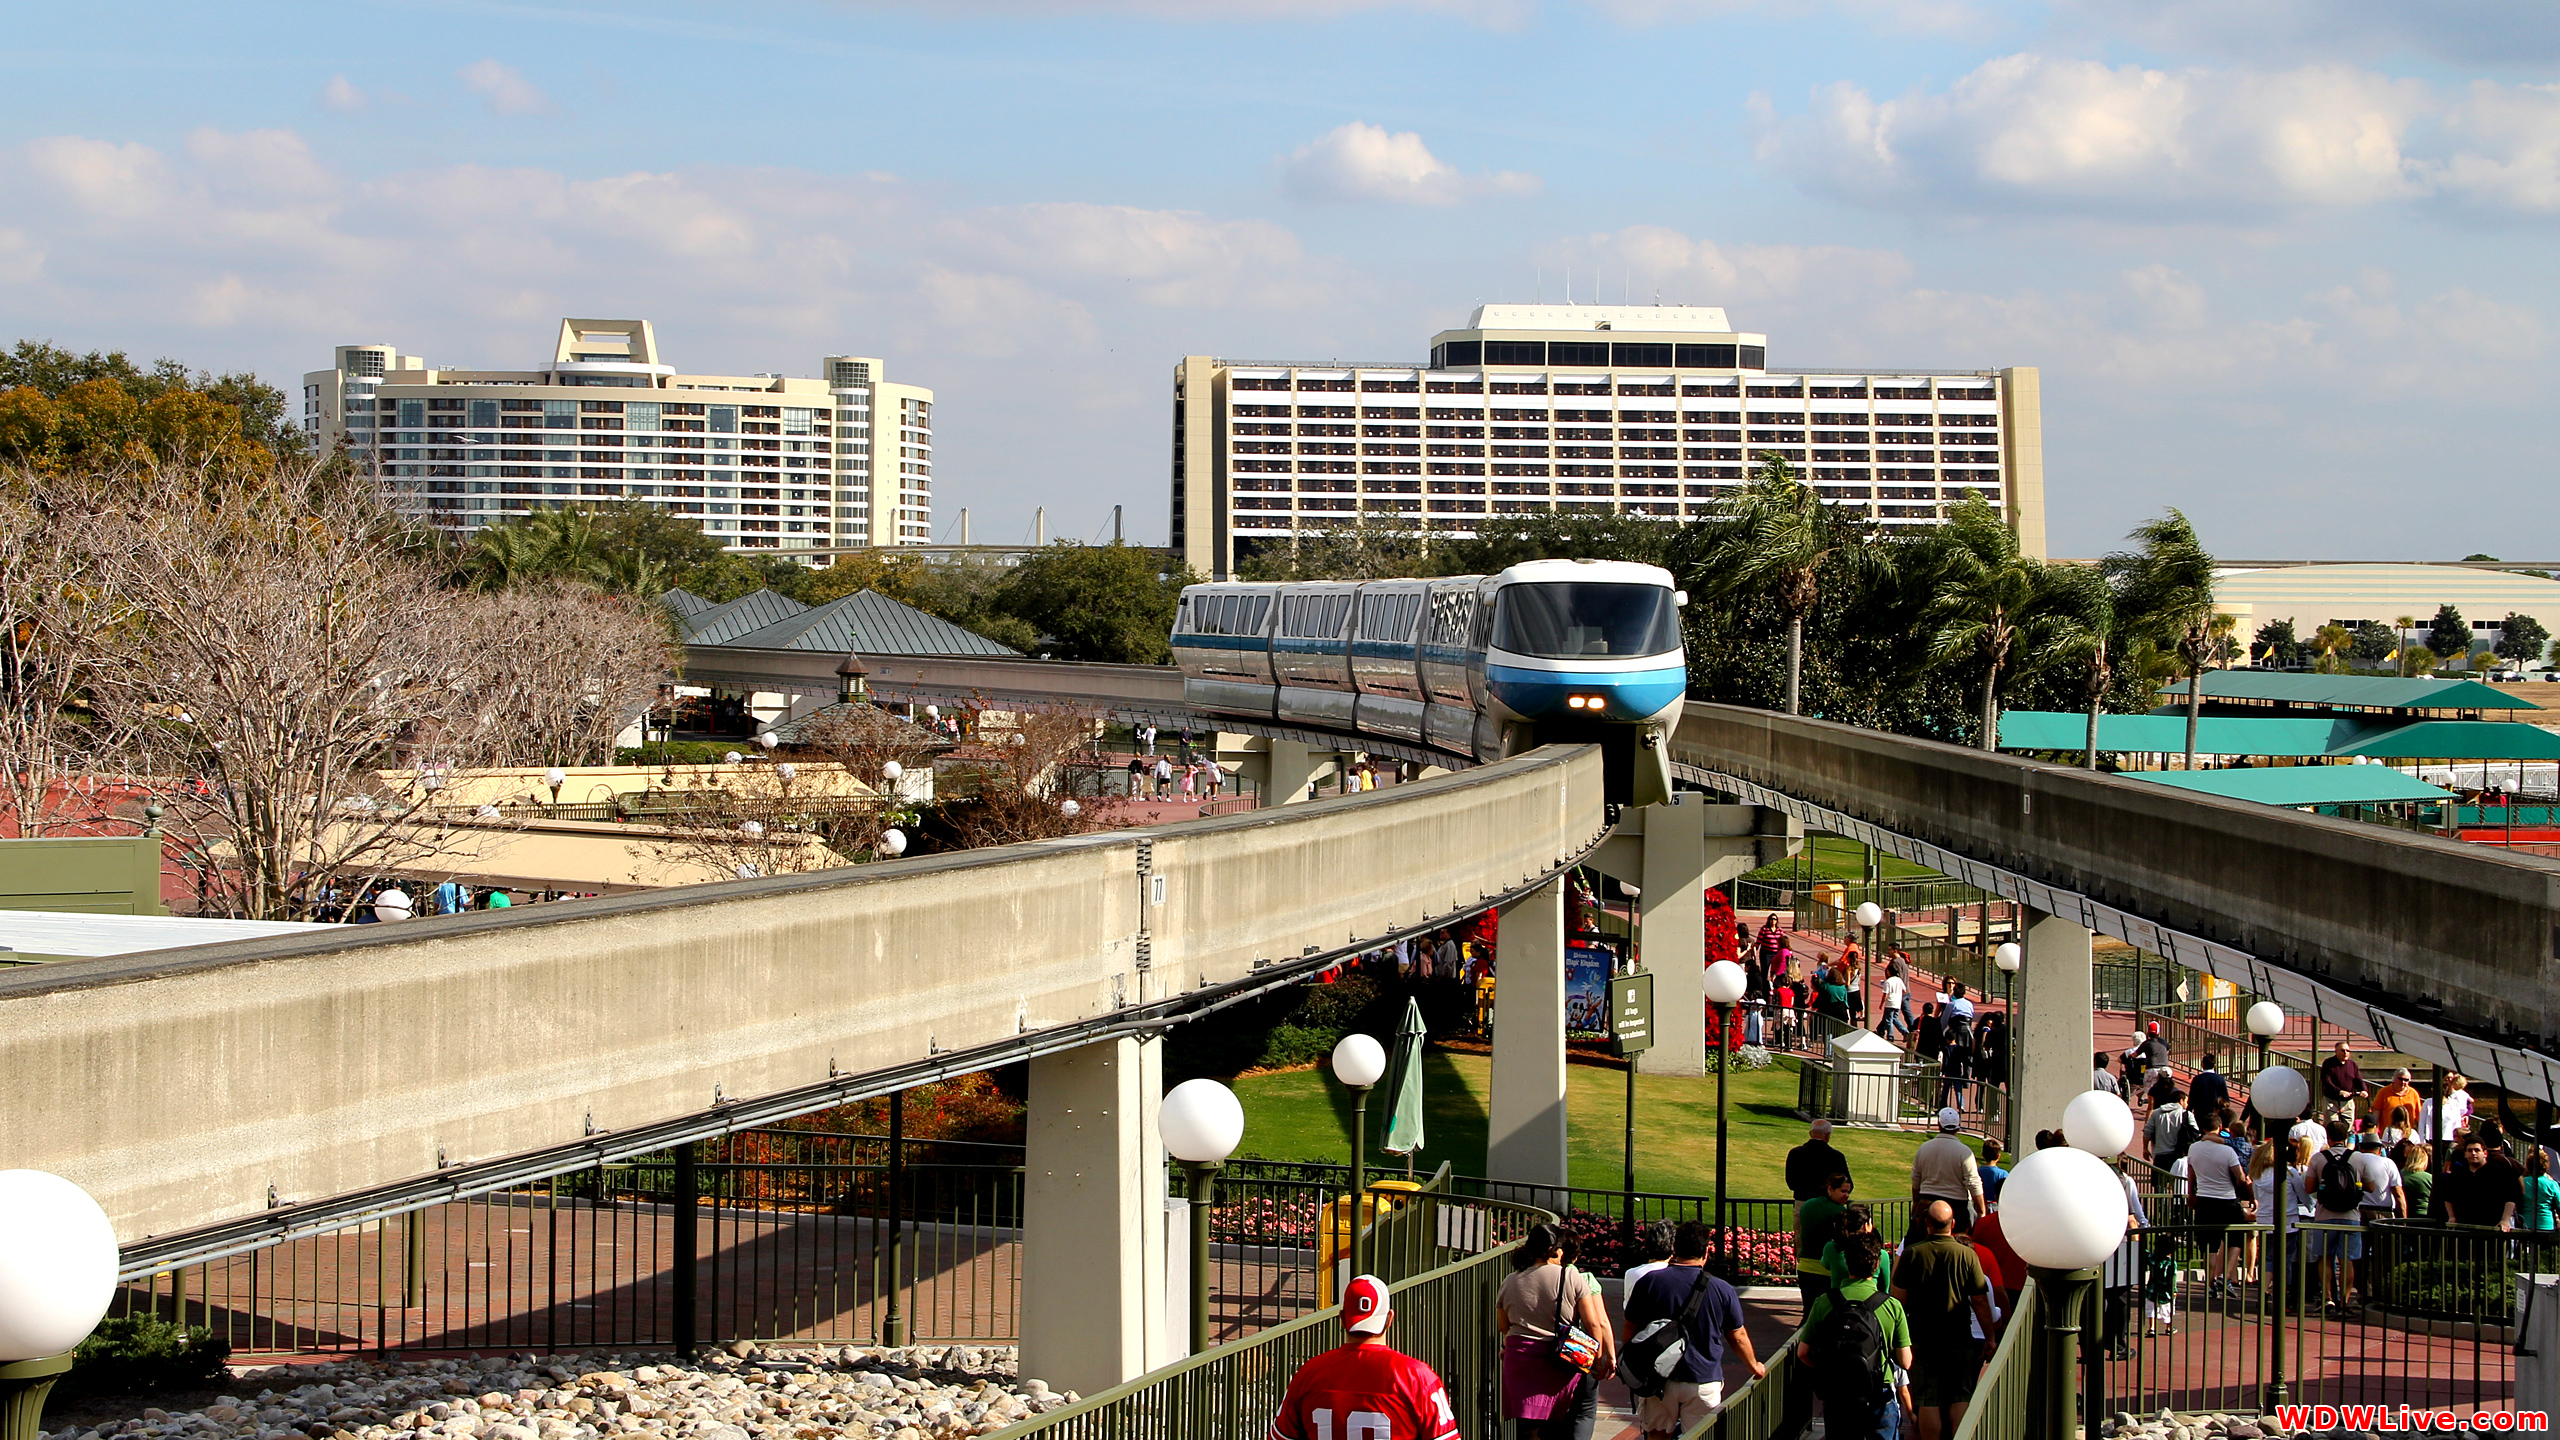 Monorail: The blue Monorail arriving at the Magic Kingdom station.